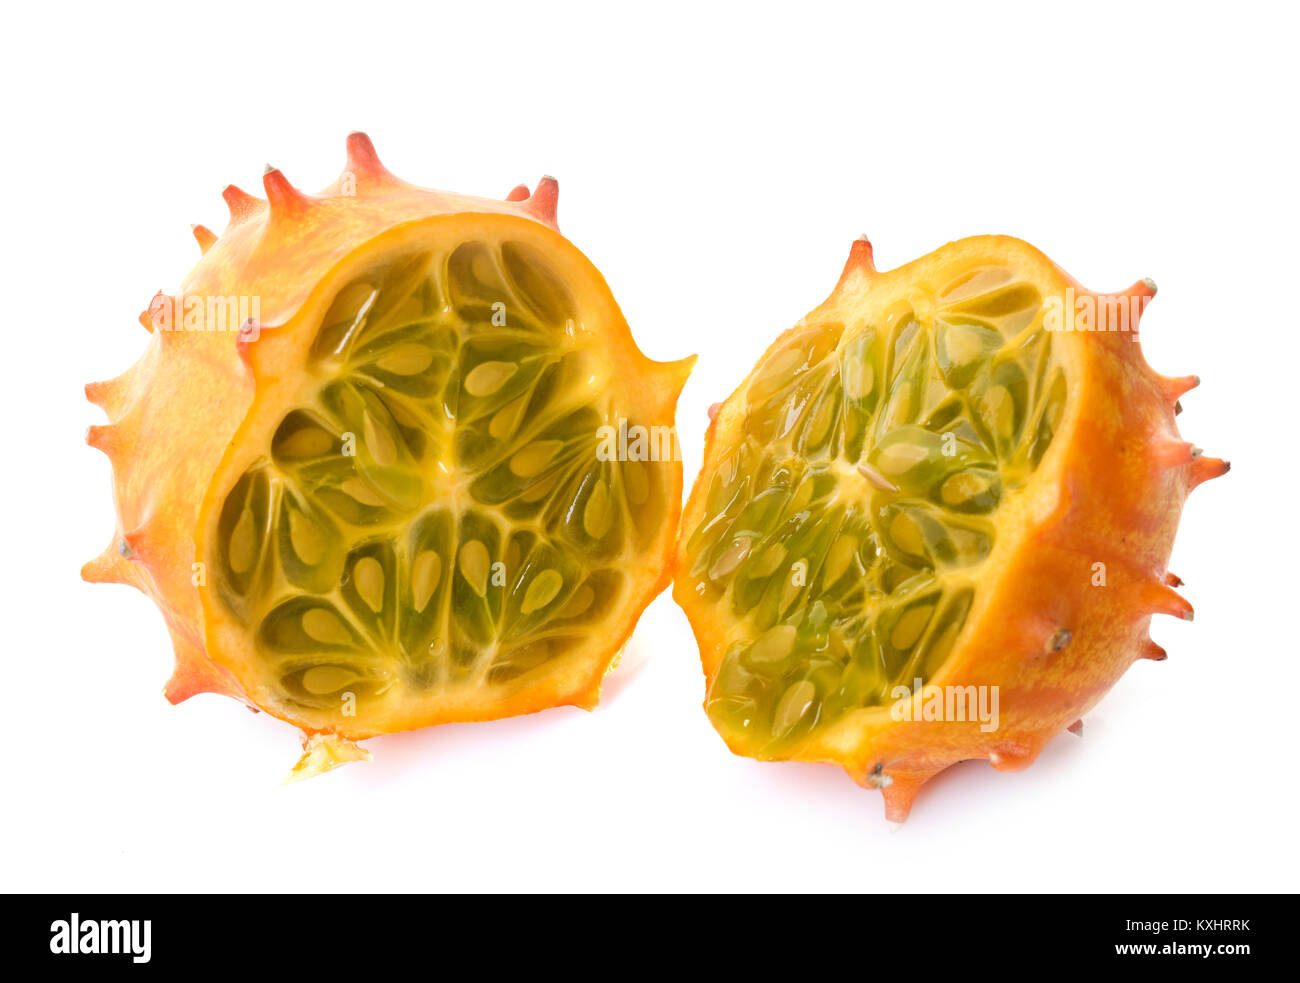 Cucumis metuliferus in front of white background Banque D'Images